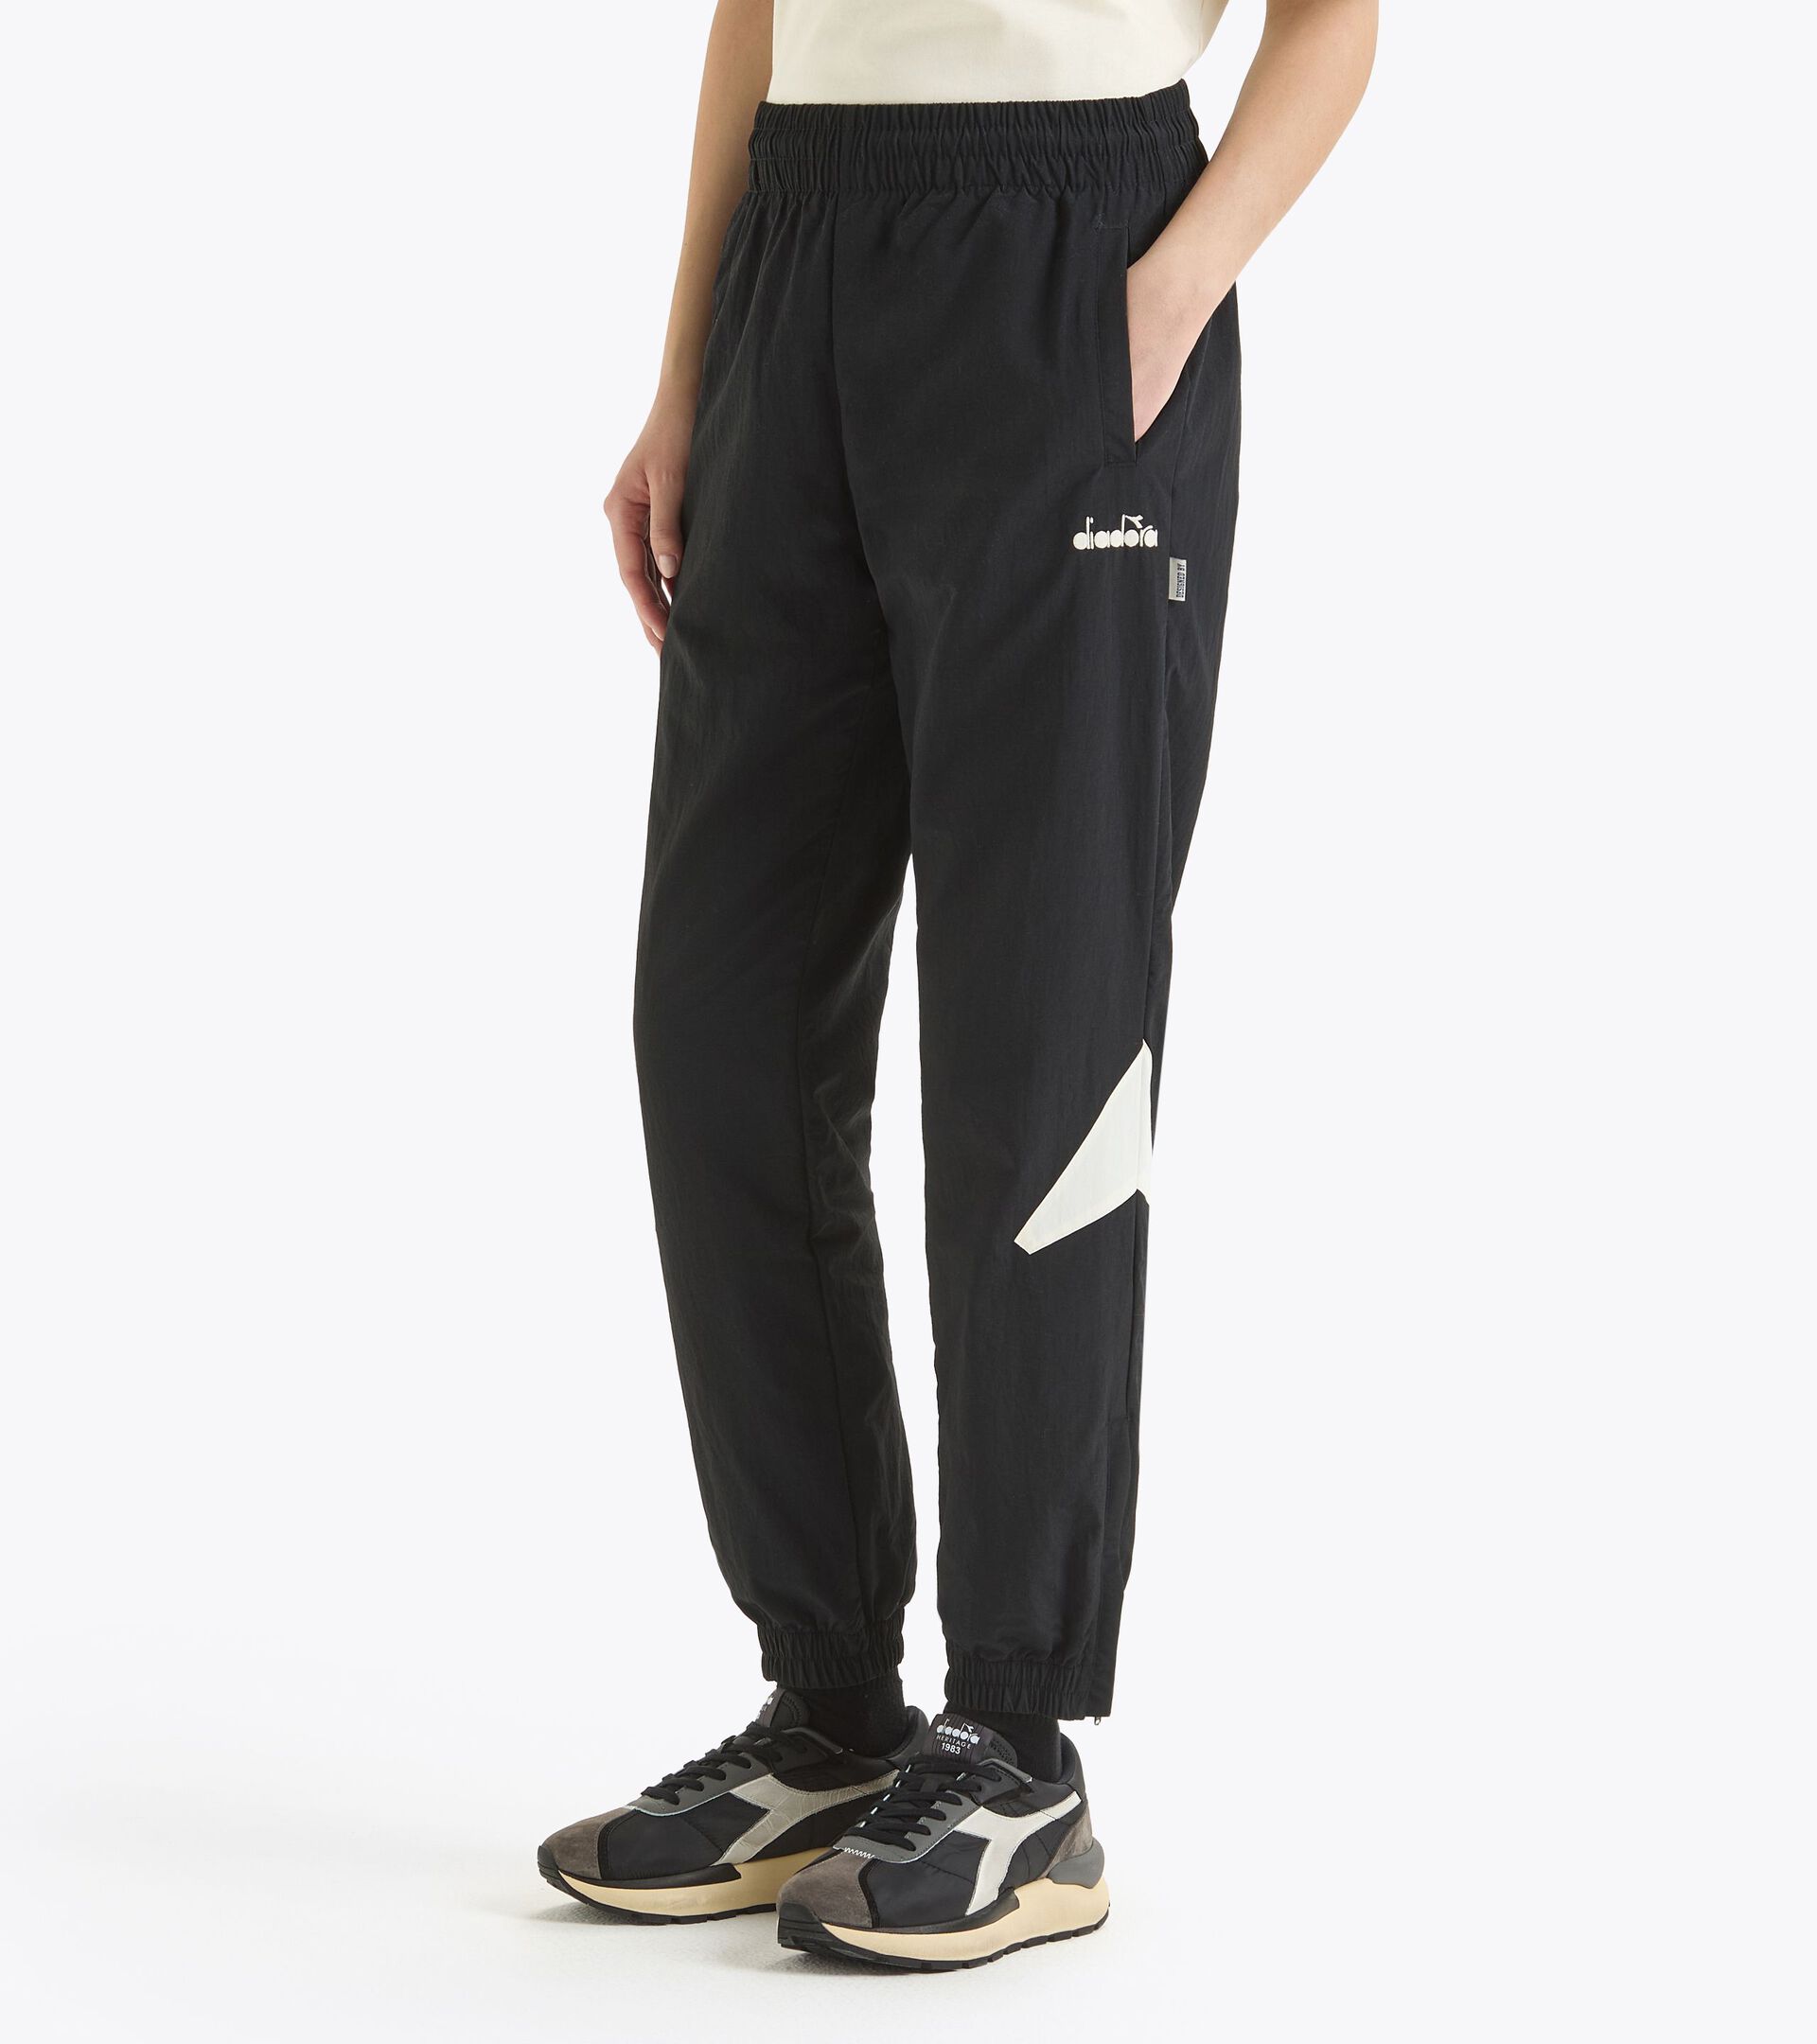 Sporthose - made in Italy - genderneutral TRACK PANTS LEGACY SCHWARZ - Diadora